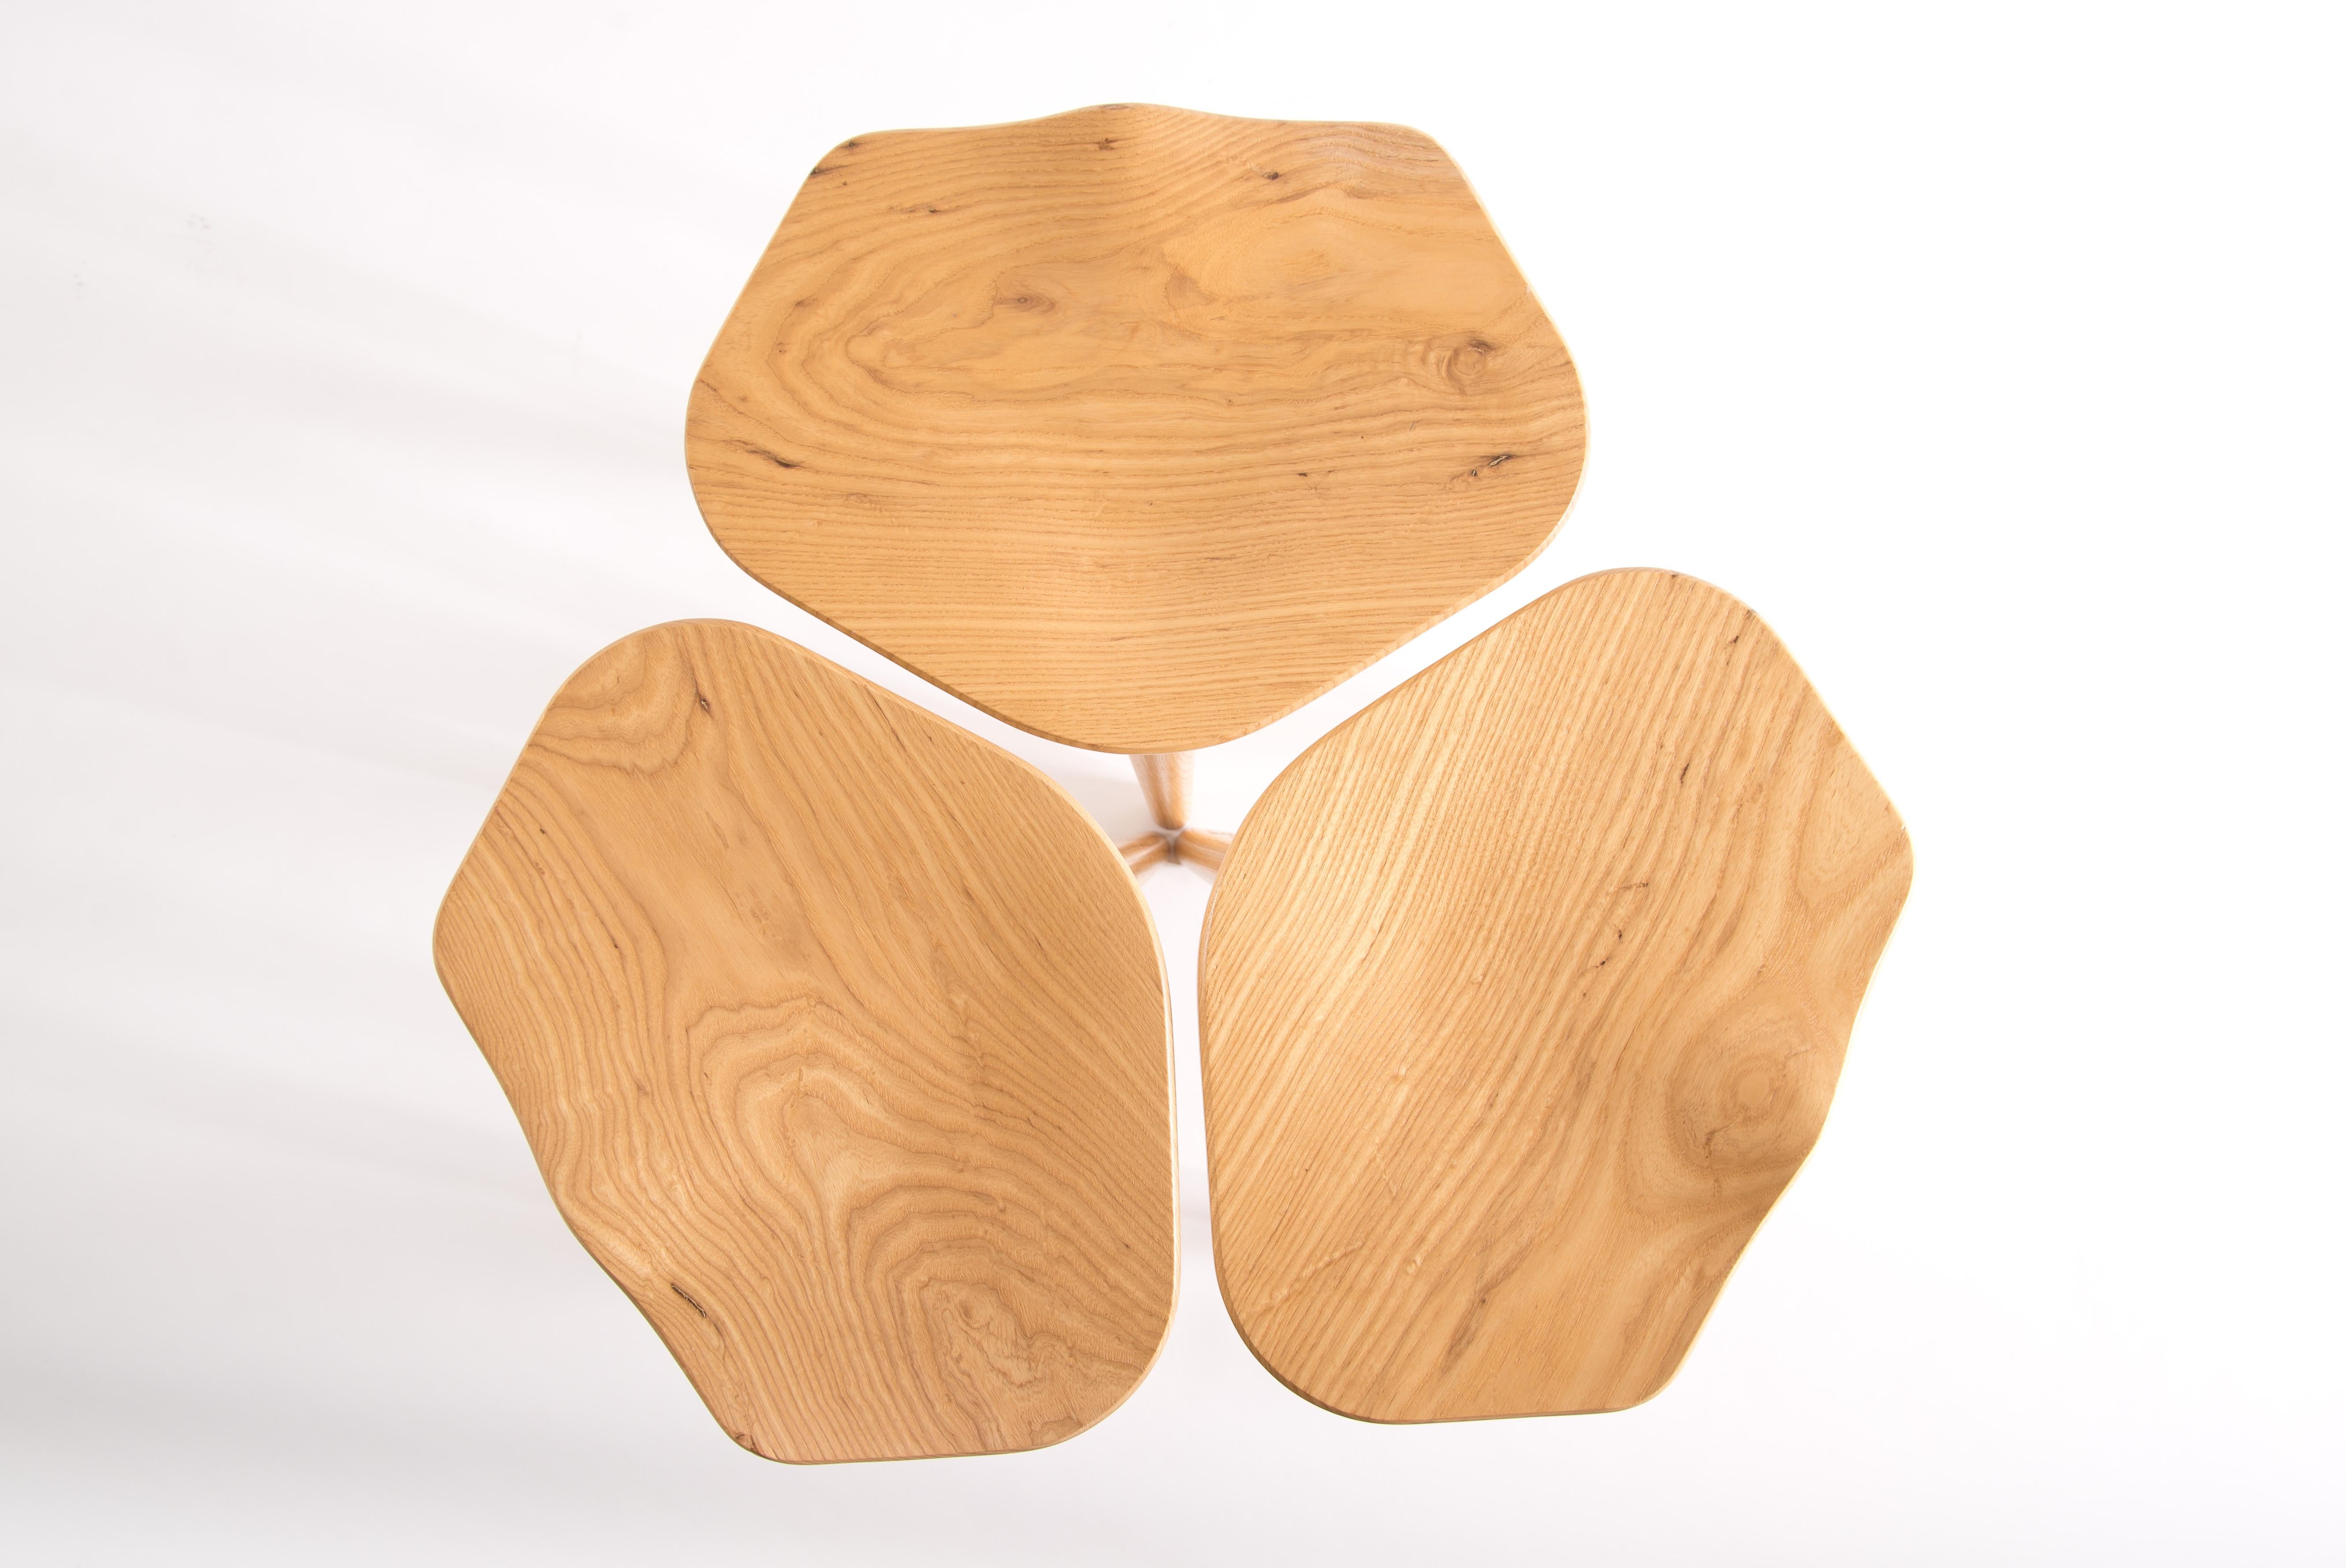 A sculptural clover or three stools: tam is both of those things. Like leaves that blow in the wind, the individual stools can land dispersed throughout the house, or they can stay together as a clover, for good luck. As light shines on the tam